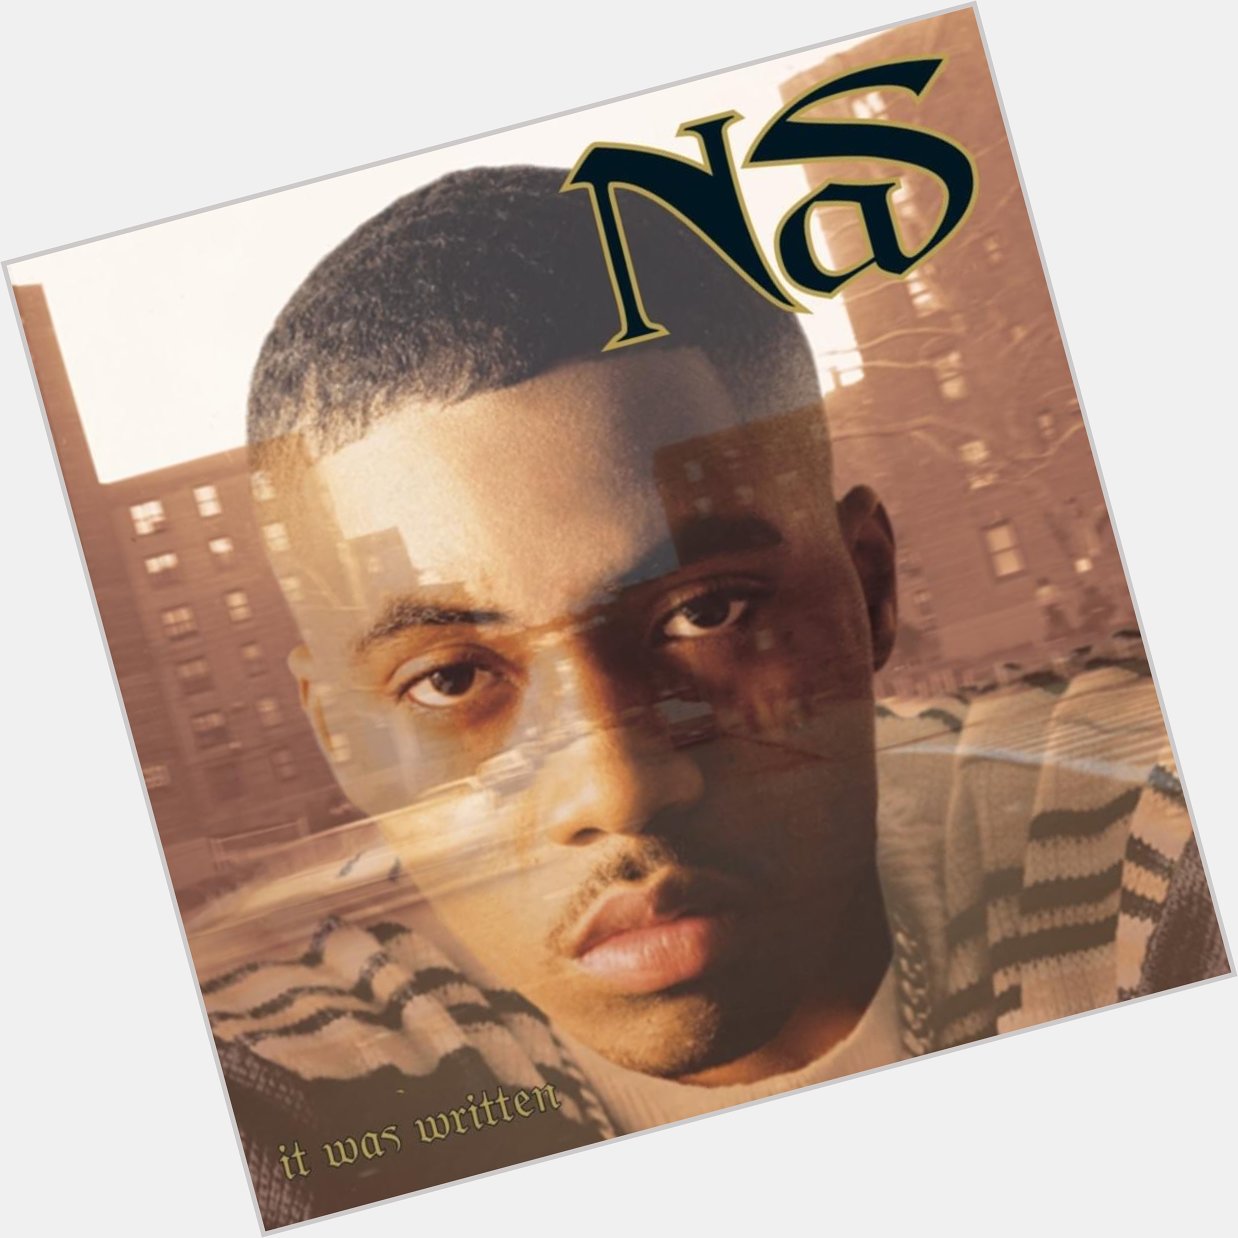 Happy Birthday Nas Which Album did you think was better? 